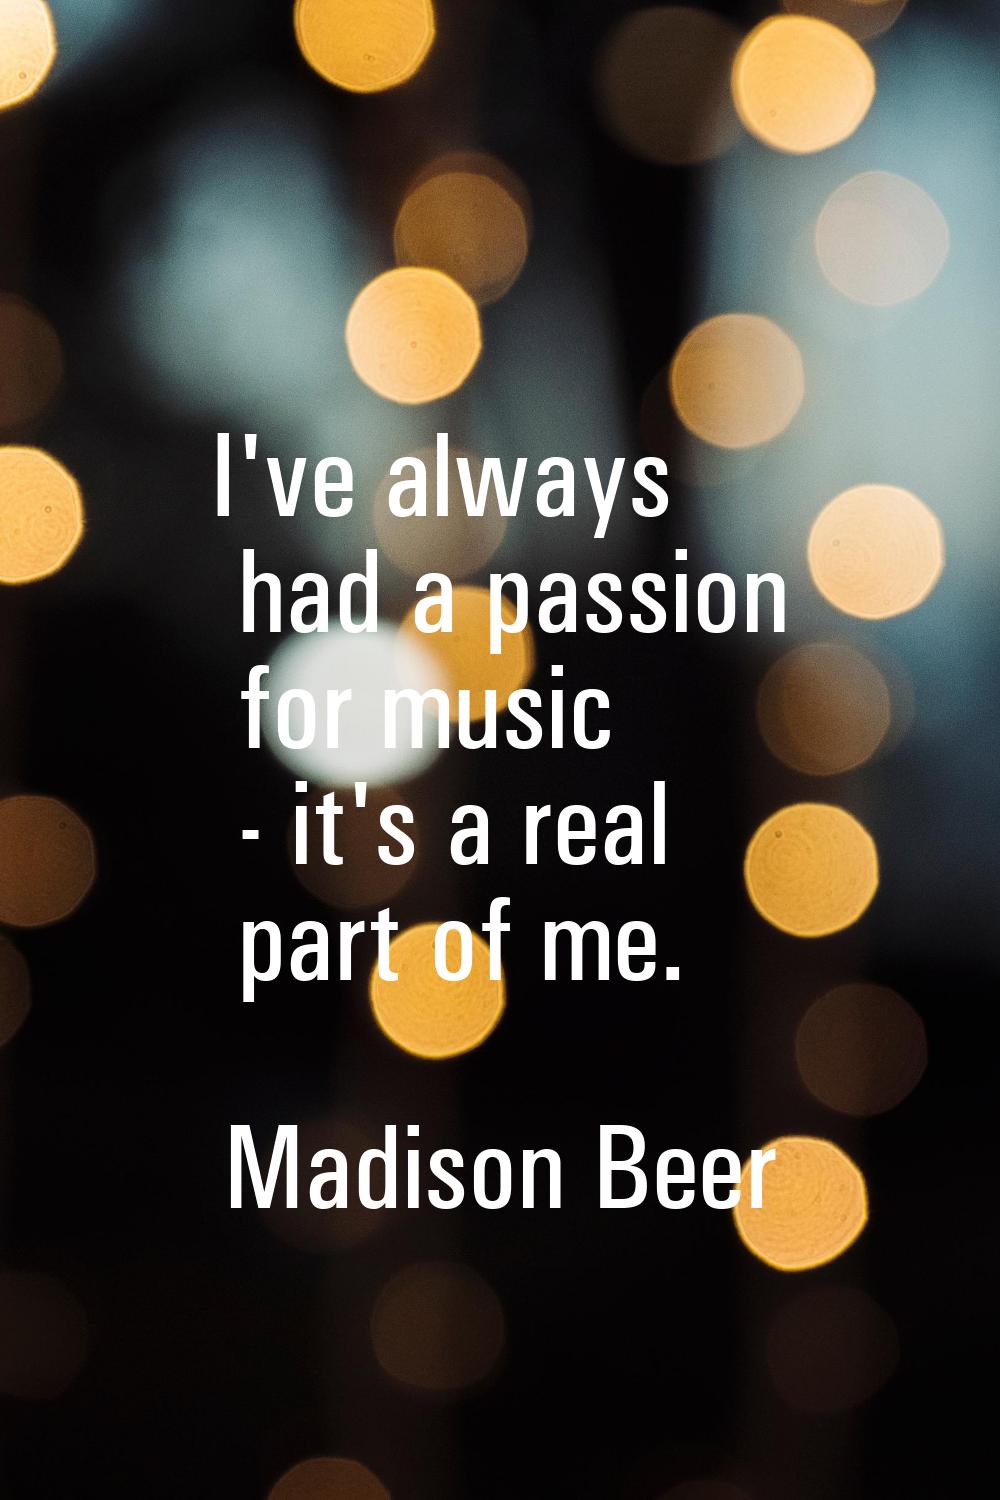 I've always had a passion for music - it's a real part of me.